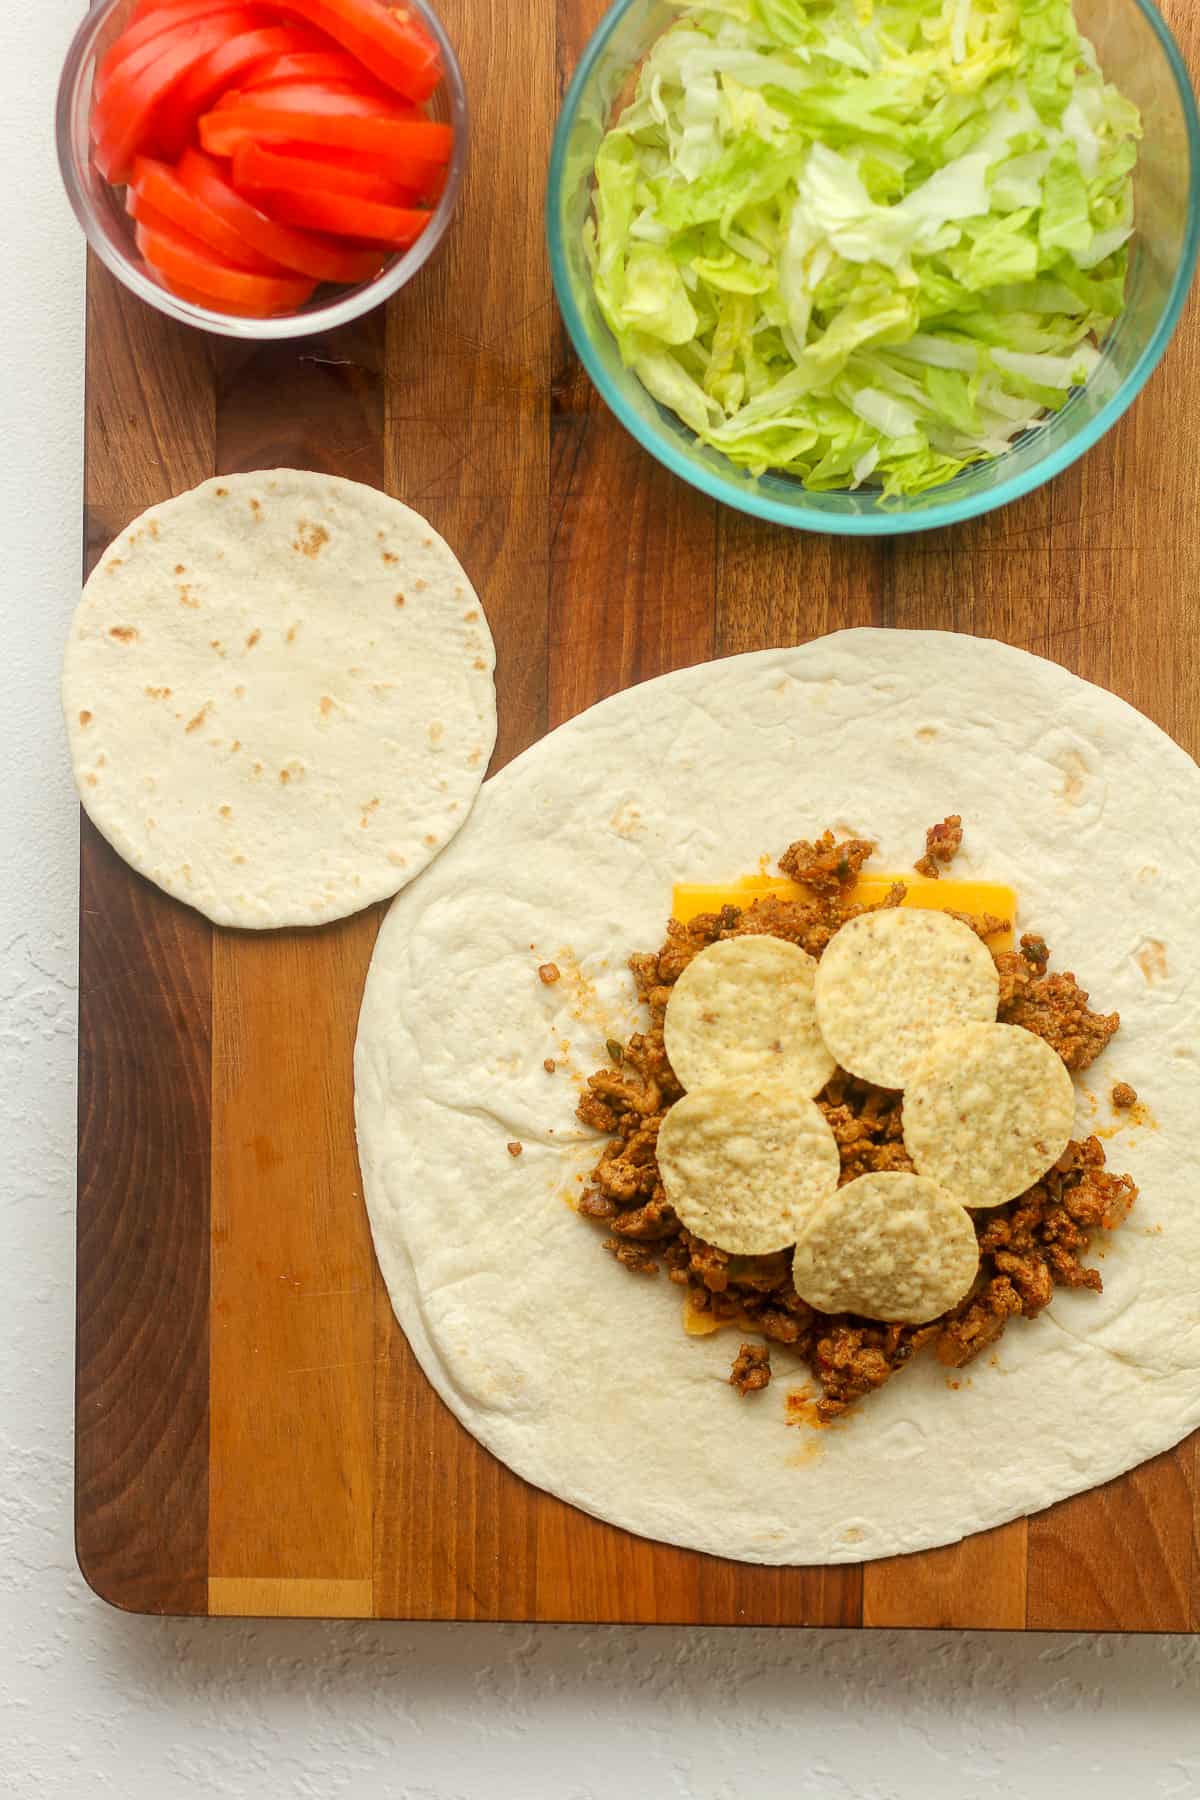 Overhead view of a board with a large tortilla and some of the toppings.